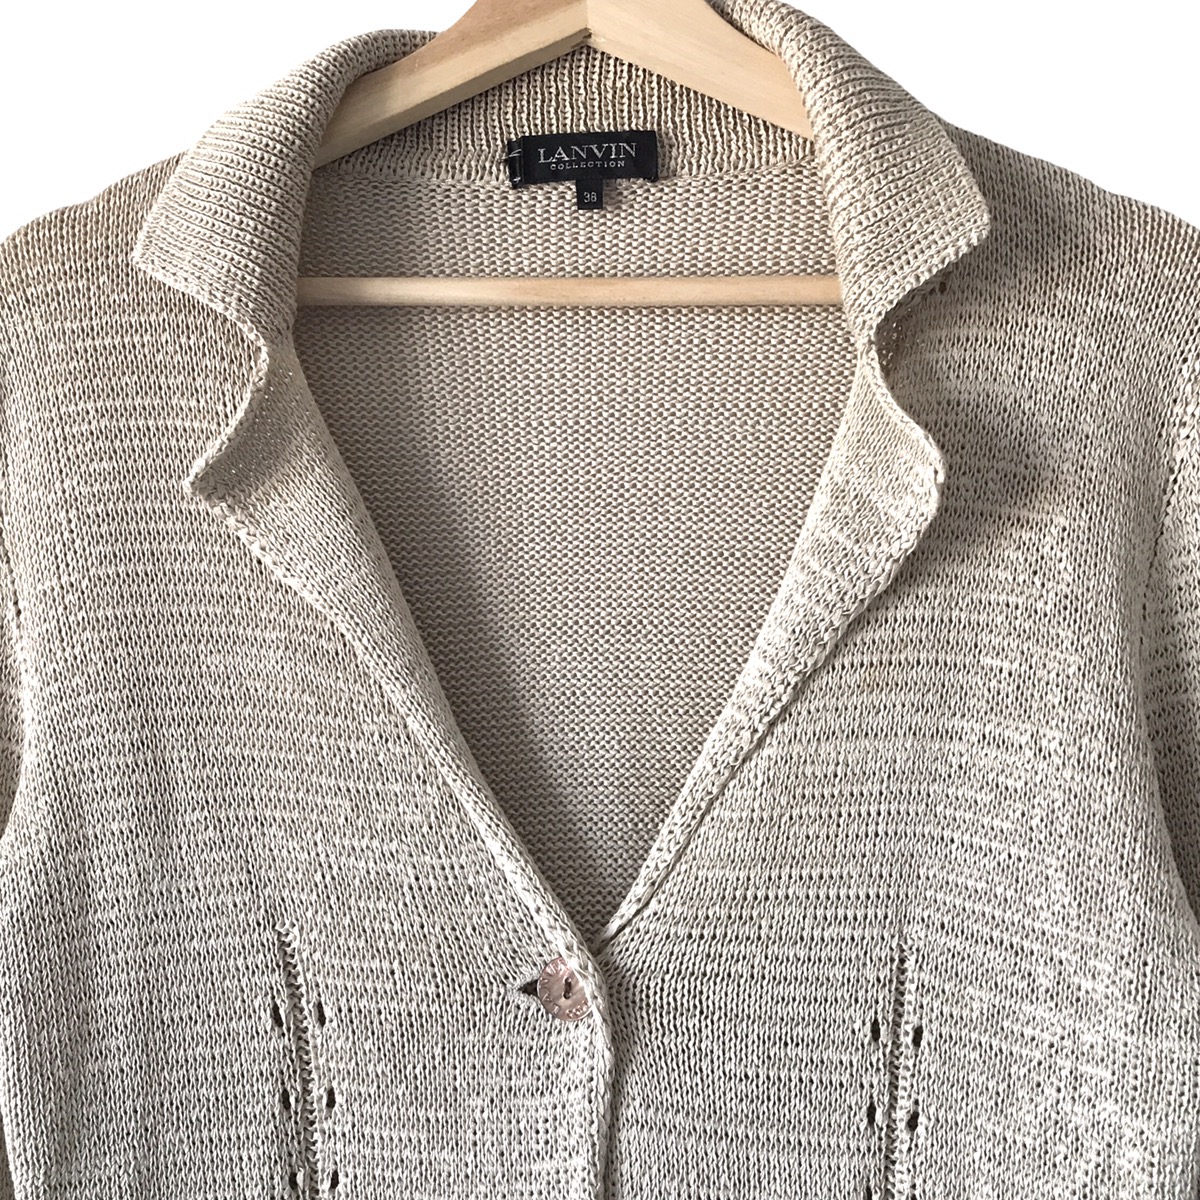 Authentic Vintage Lanvin Collection Paris Knitted Cardigan - 3